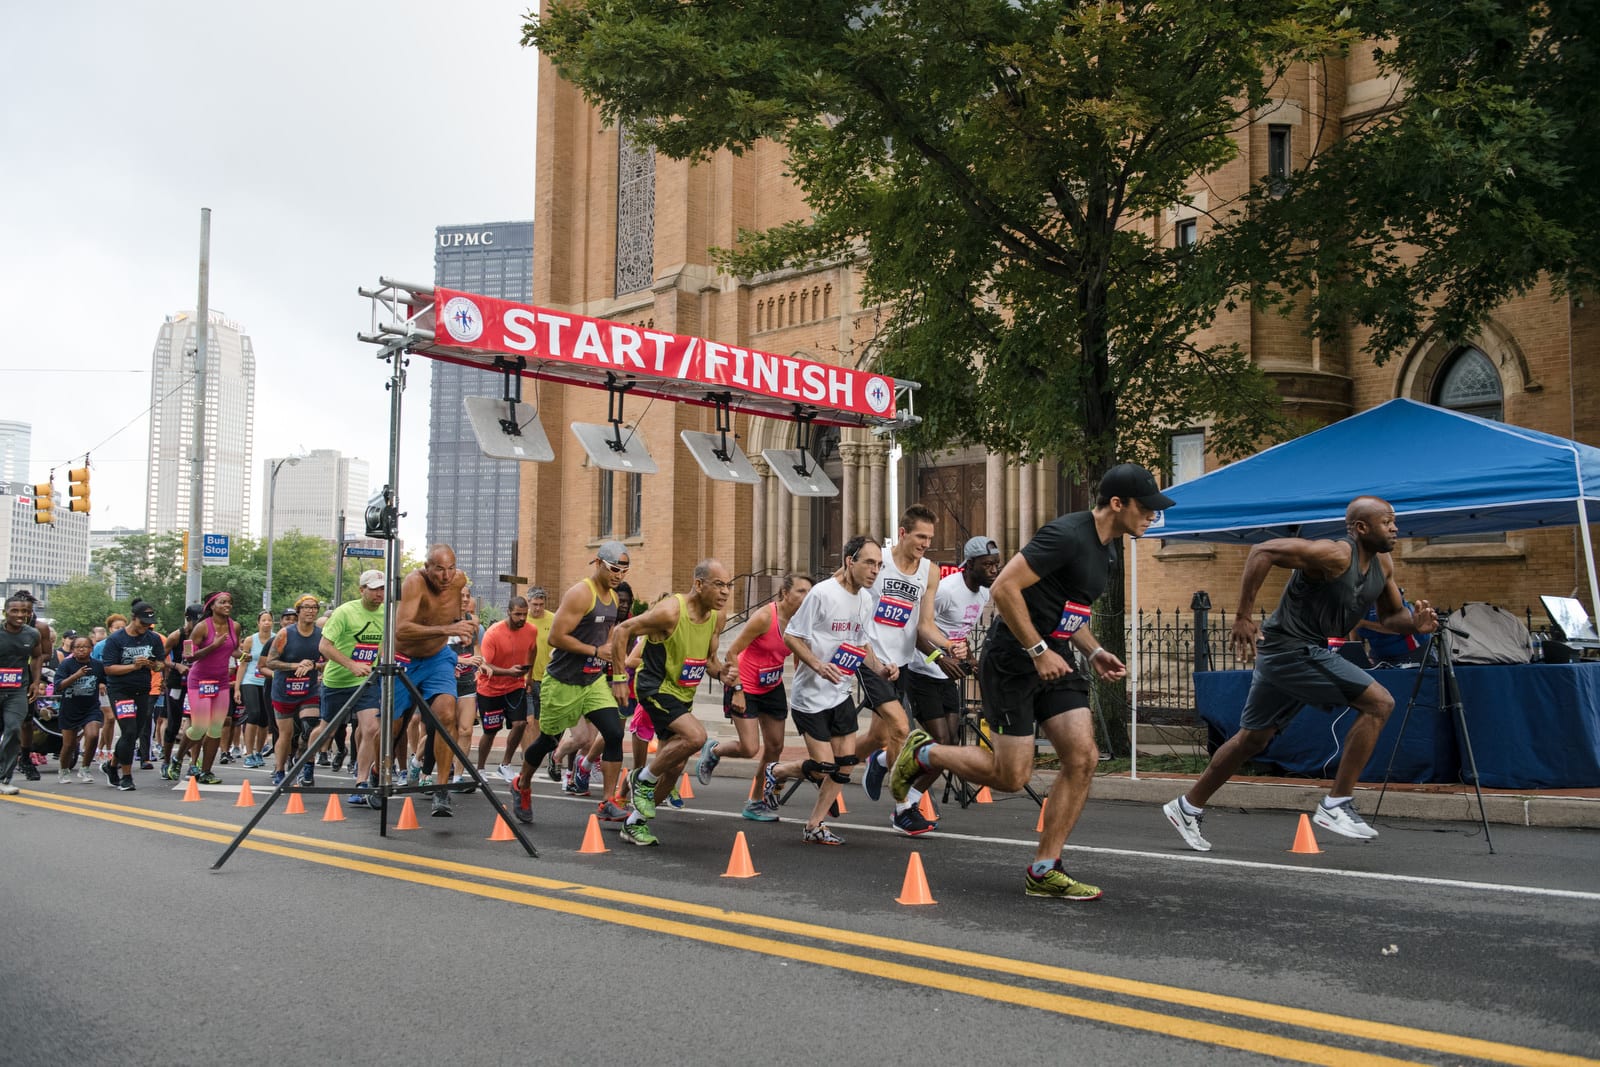 A group of runners take off through a starting gate on a street in the hill district of Pittsburgh. Pittsburgh editorial event photographer.